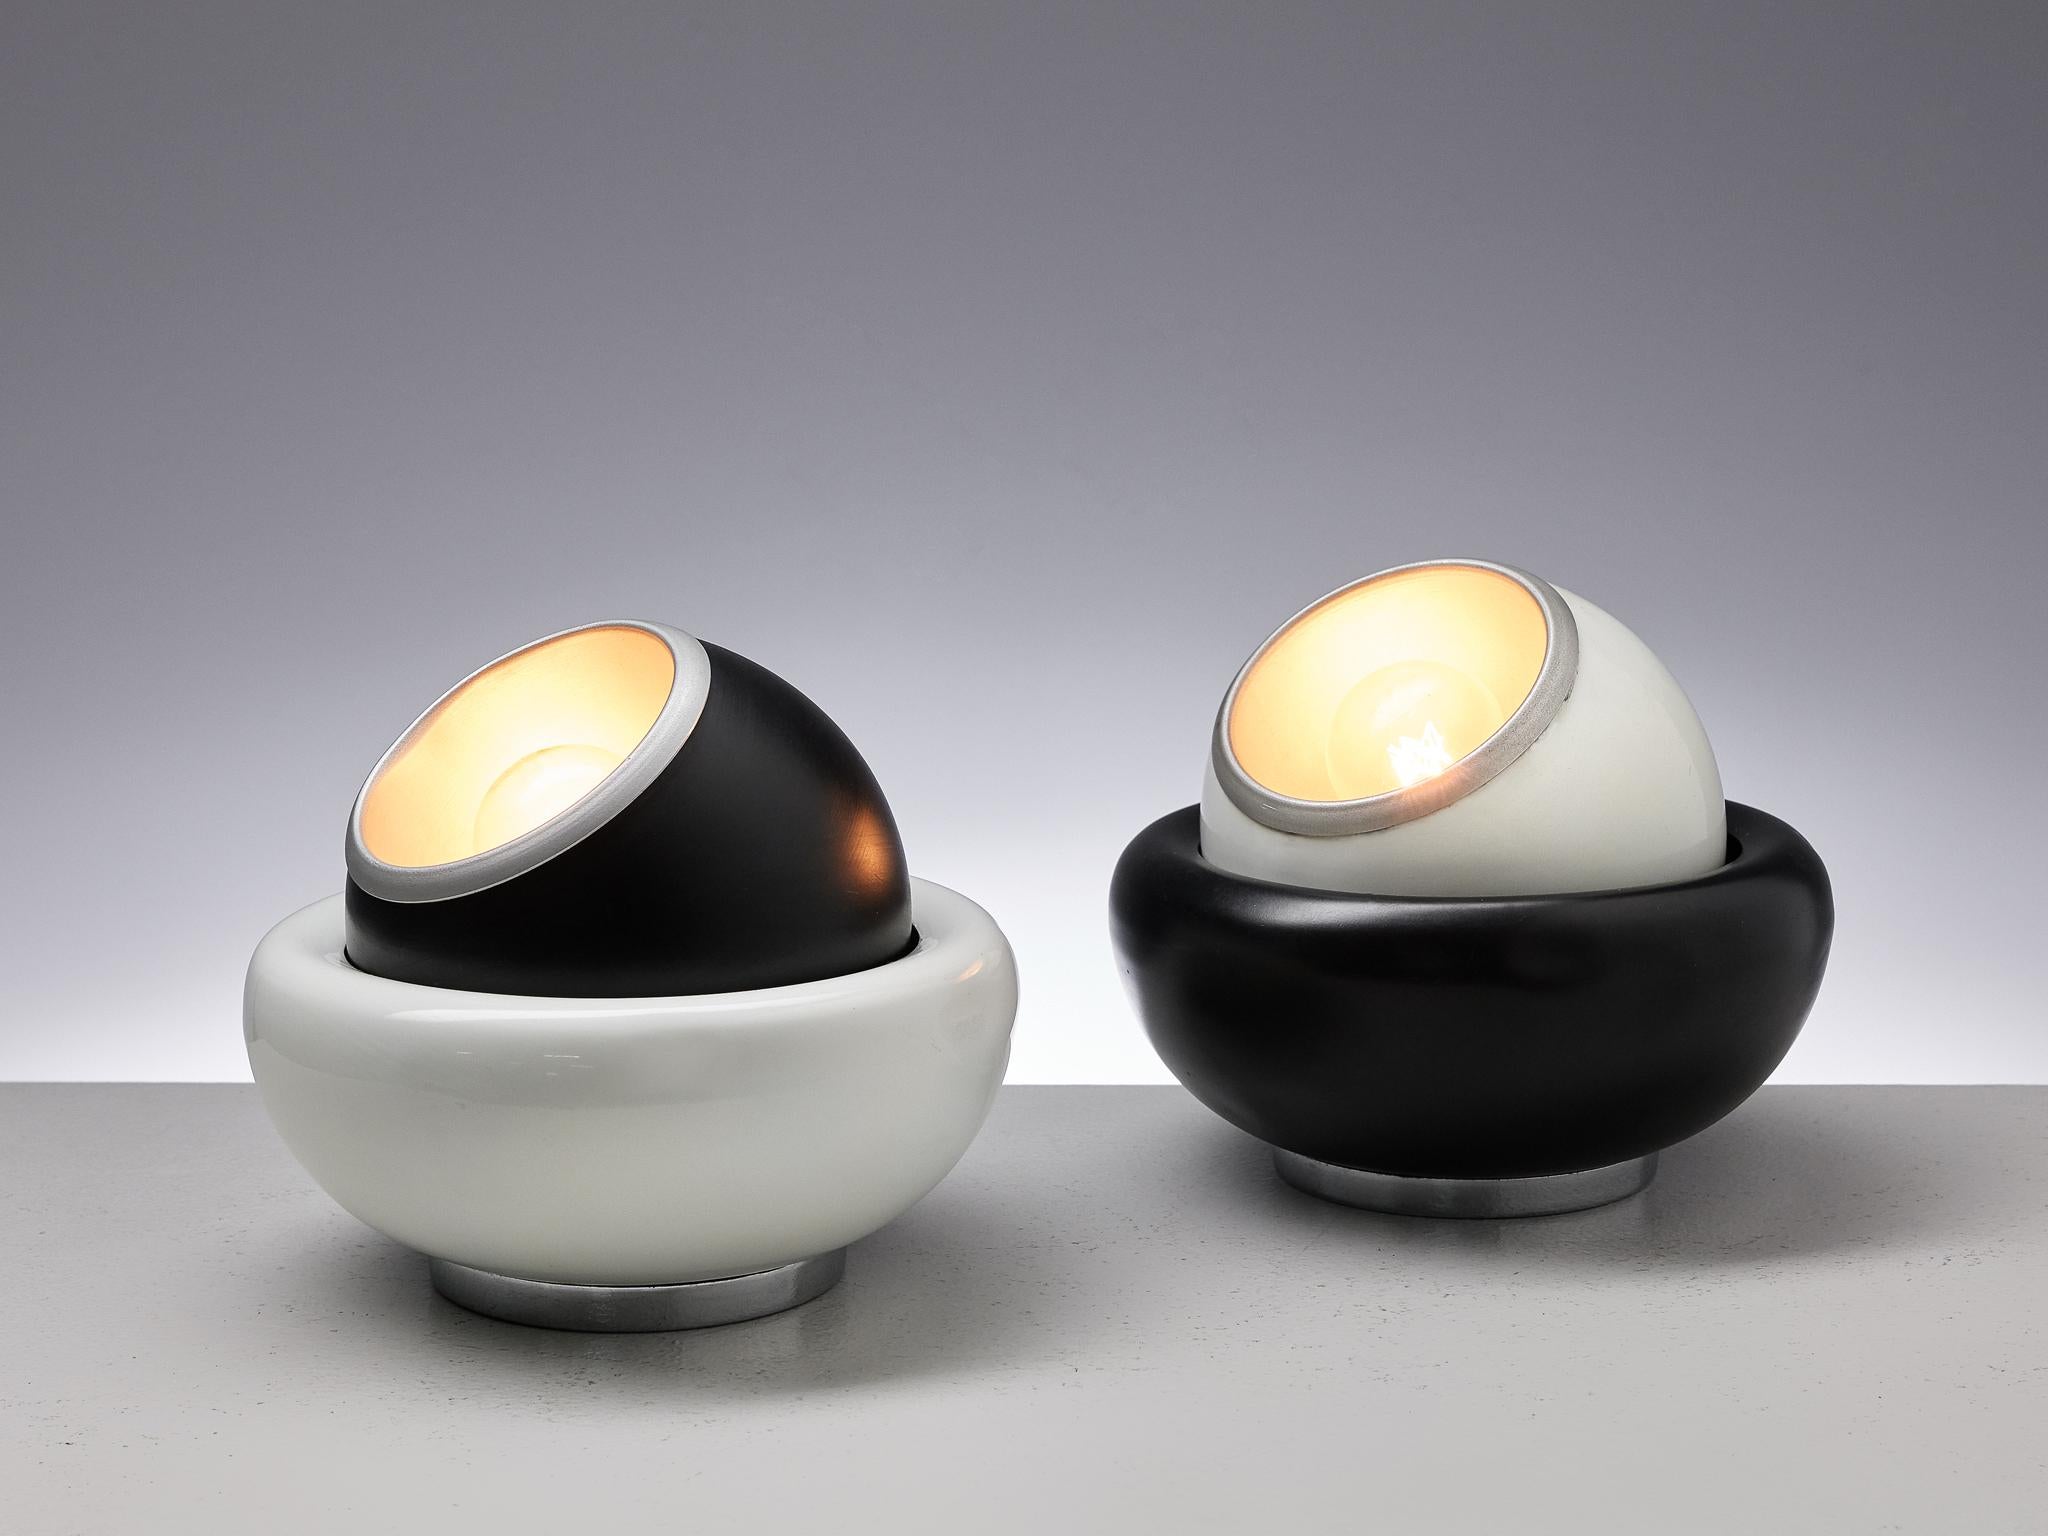 Pair of table lamps, lacquered metal, Italy, 1970s

A pair of Postmodern table lamps in black and white lacquered metal. The lights consist of a bowl that holds the spheres, which can be rotated in any direction. The light bulbs create a direct